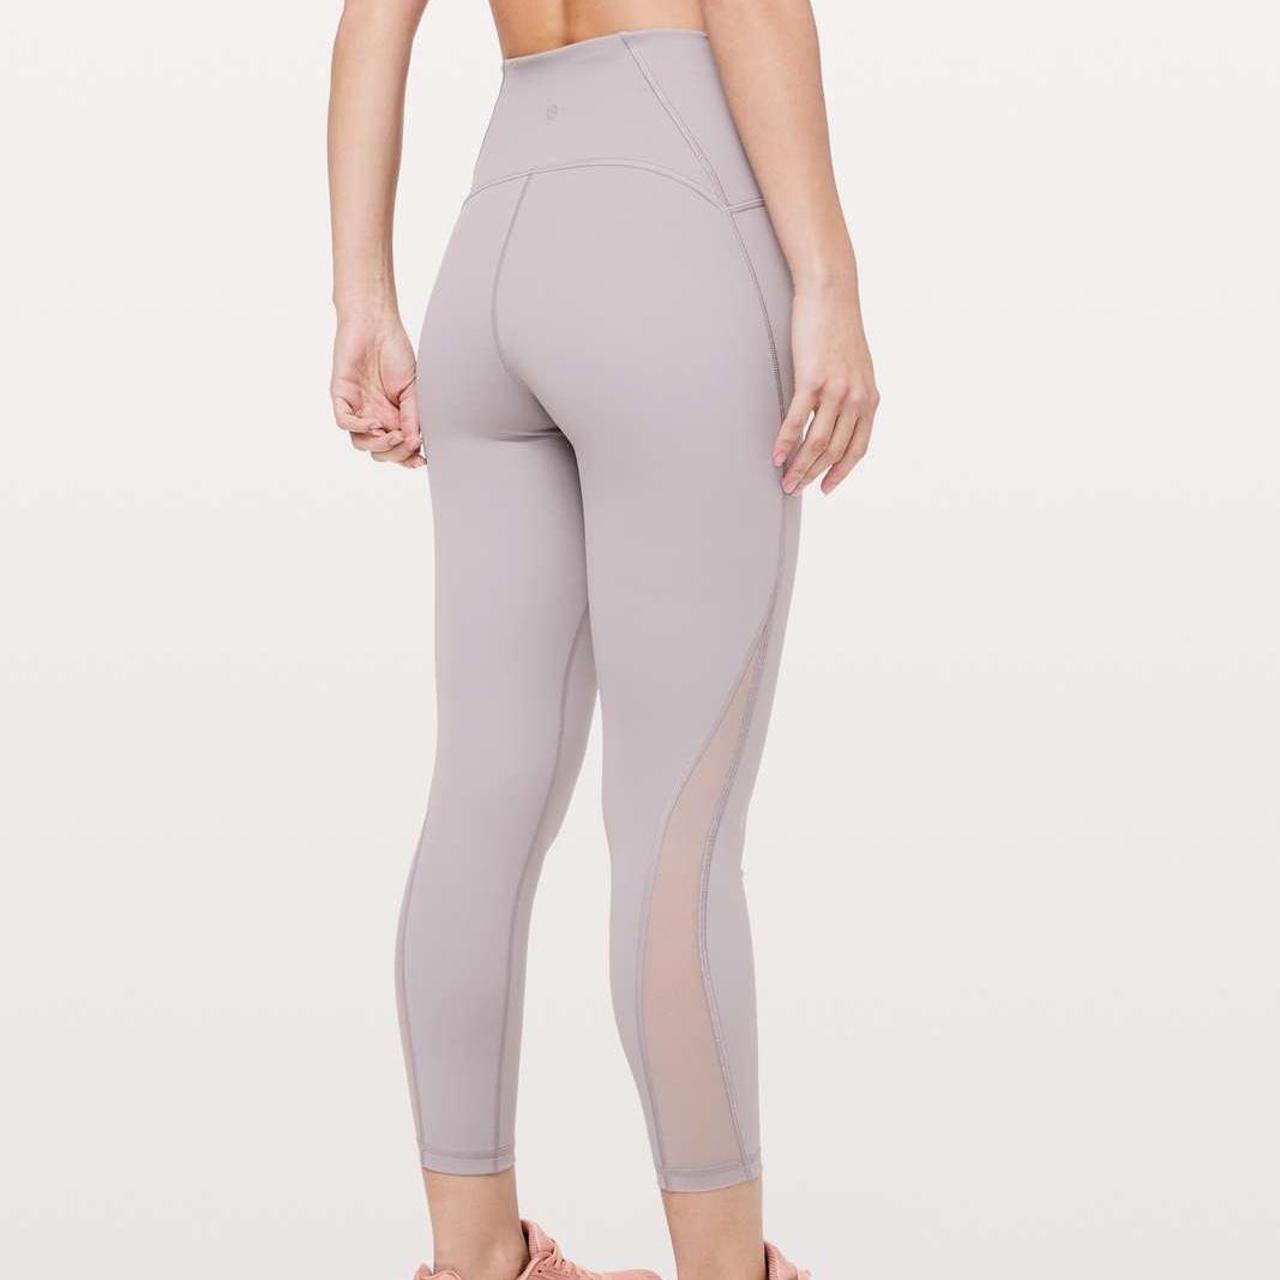 Explore Recycled Polyester High-Waisted Front Slit Legging, 52% OFF